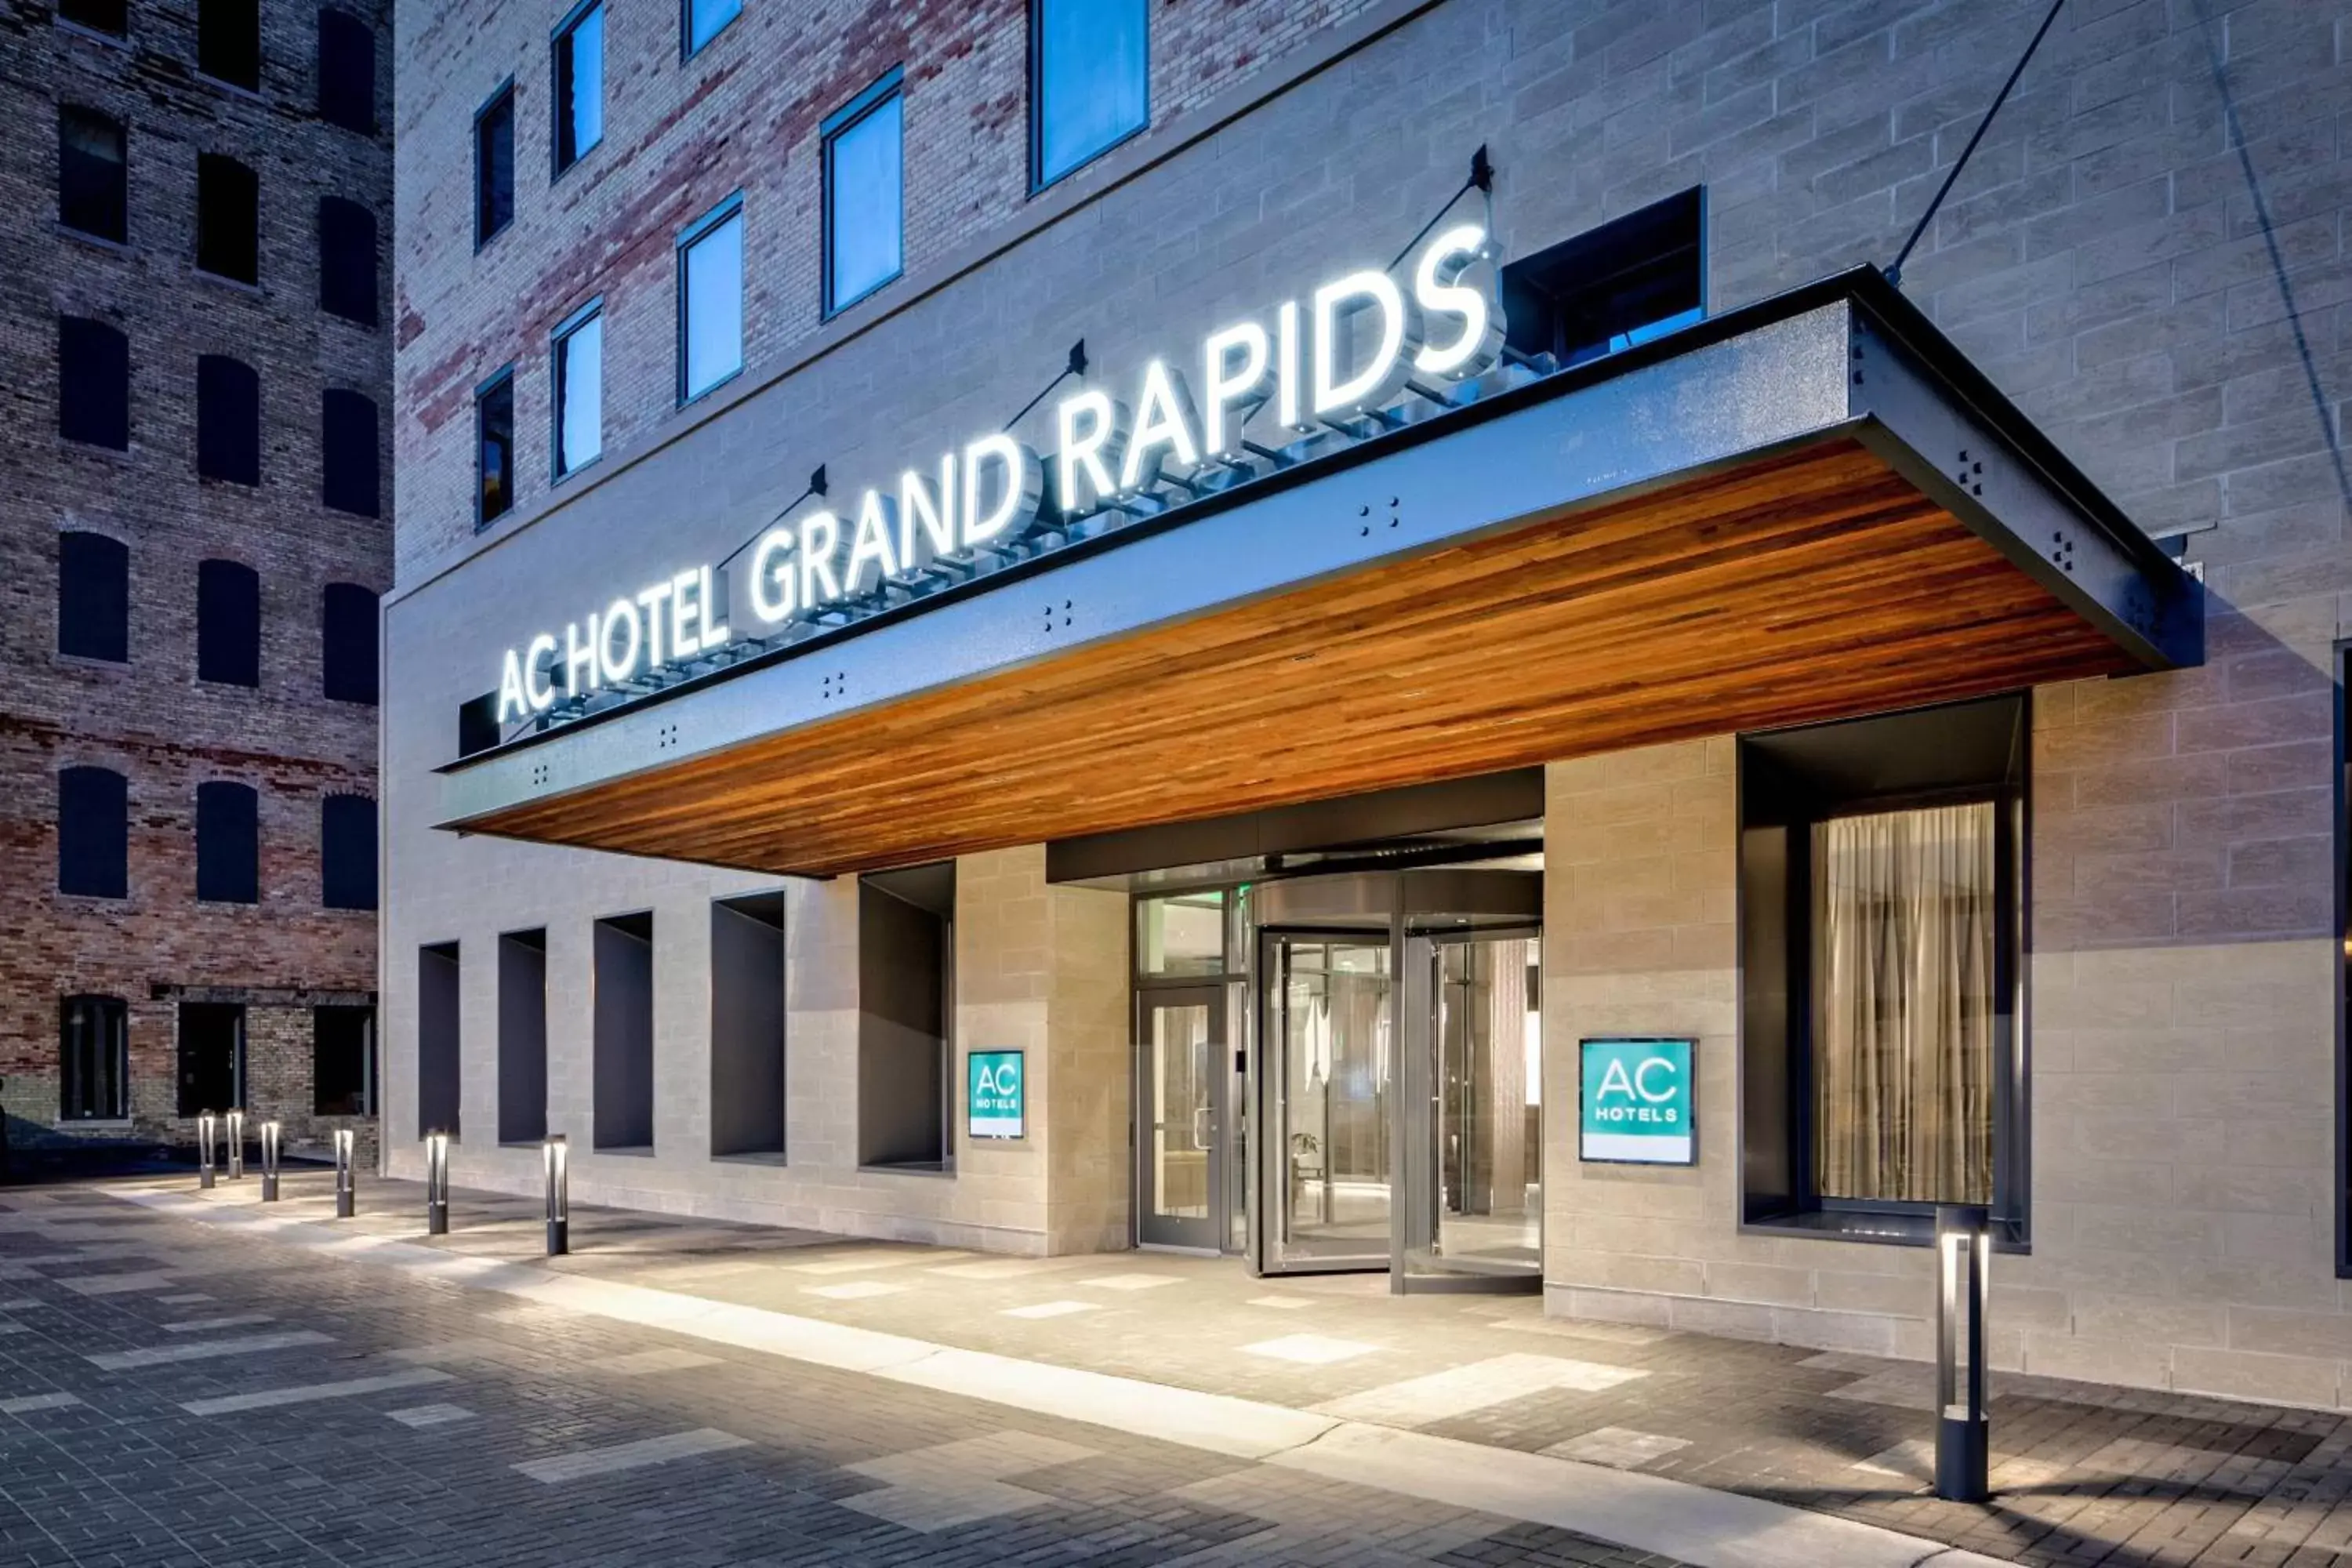 Property building in AC Hotel by Marriott Grand Rapids Downtown